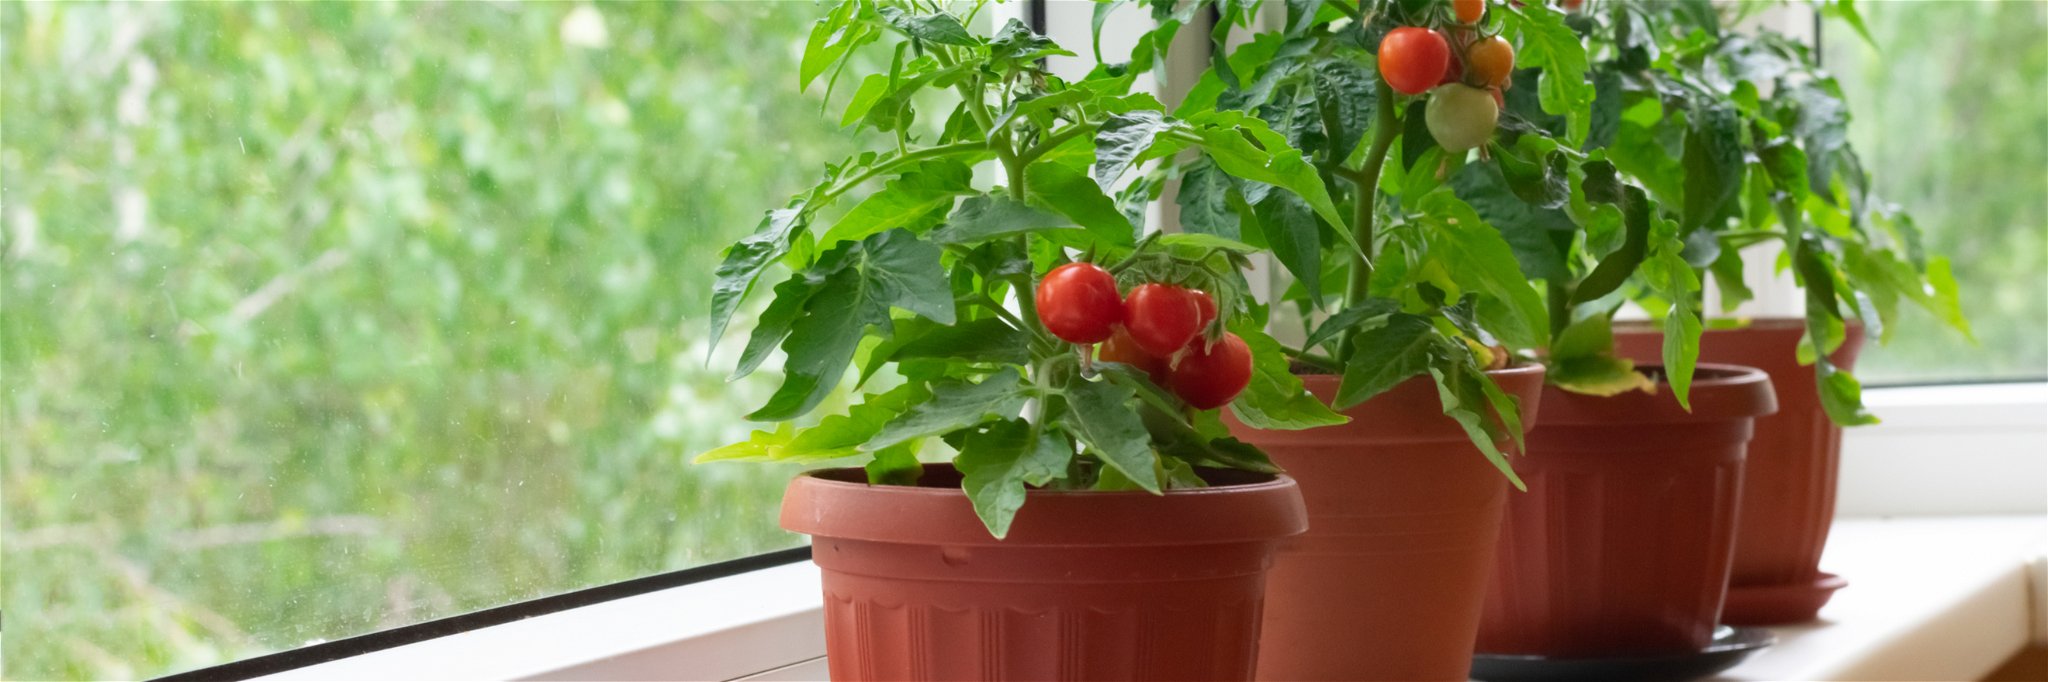 Growing tomatoes is possible even if you only have a window sill.